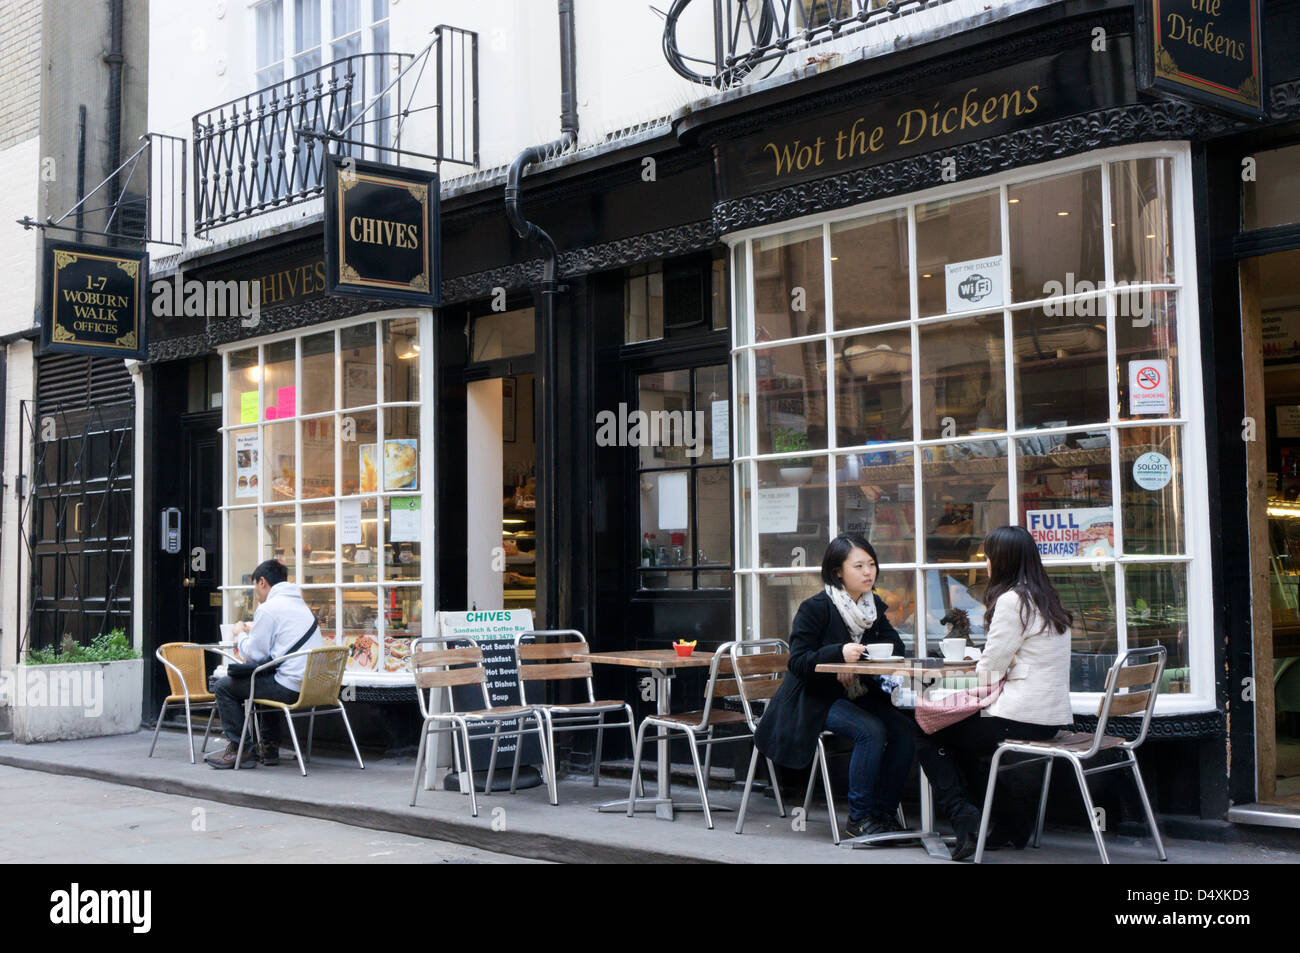 'Wot The Dickens' cafe in Woburn Walk, Bloomsbury, London. Stock Photo